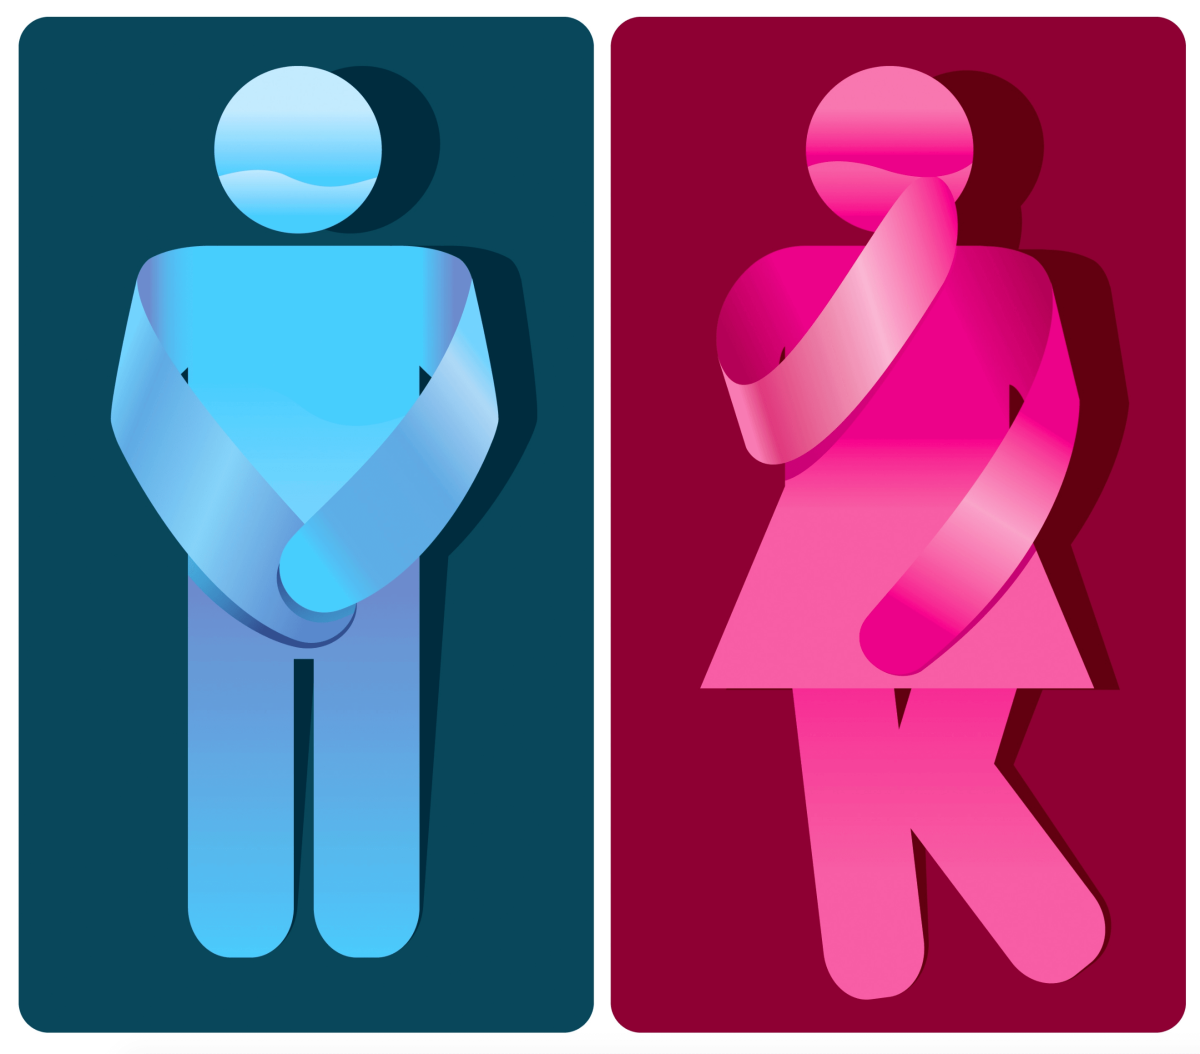 Men and women deal with incontinence